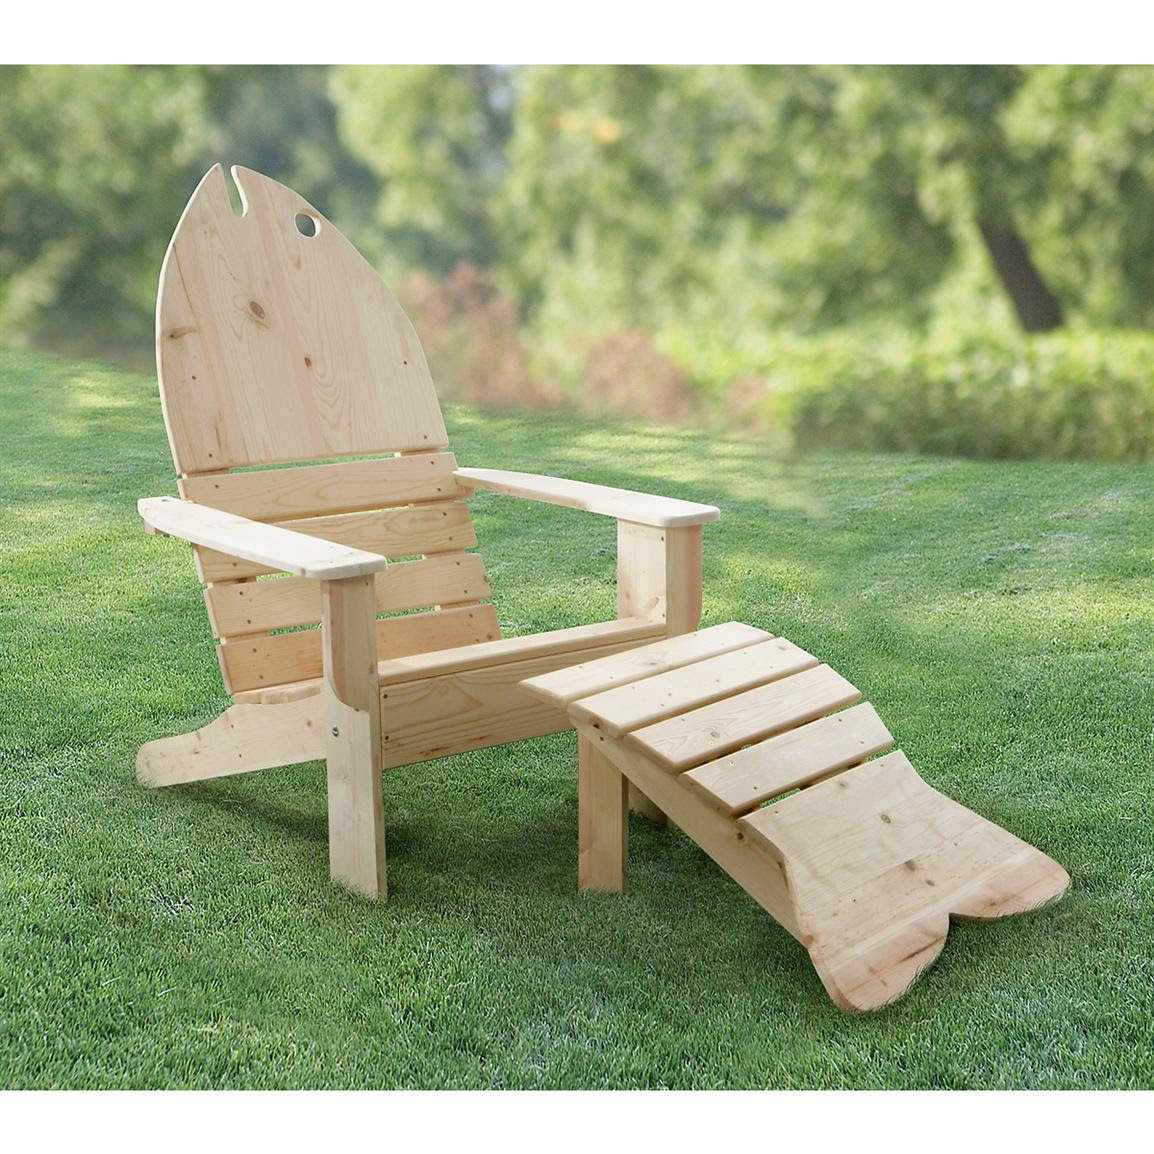 Fish adirondack chair for sale Garden furniture cad plans